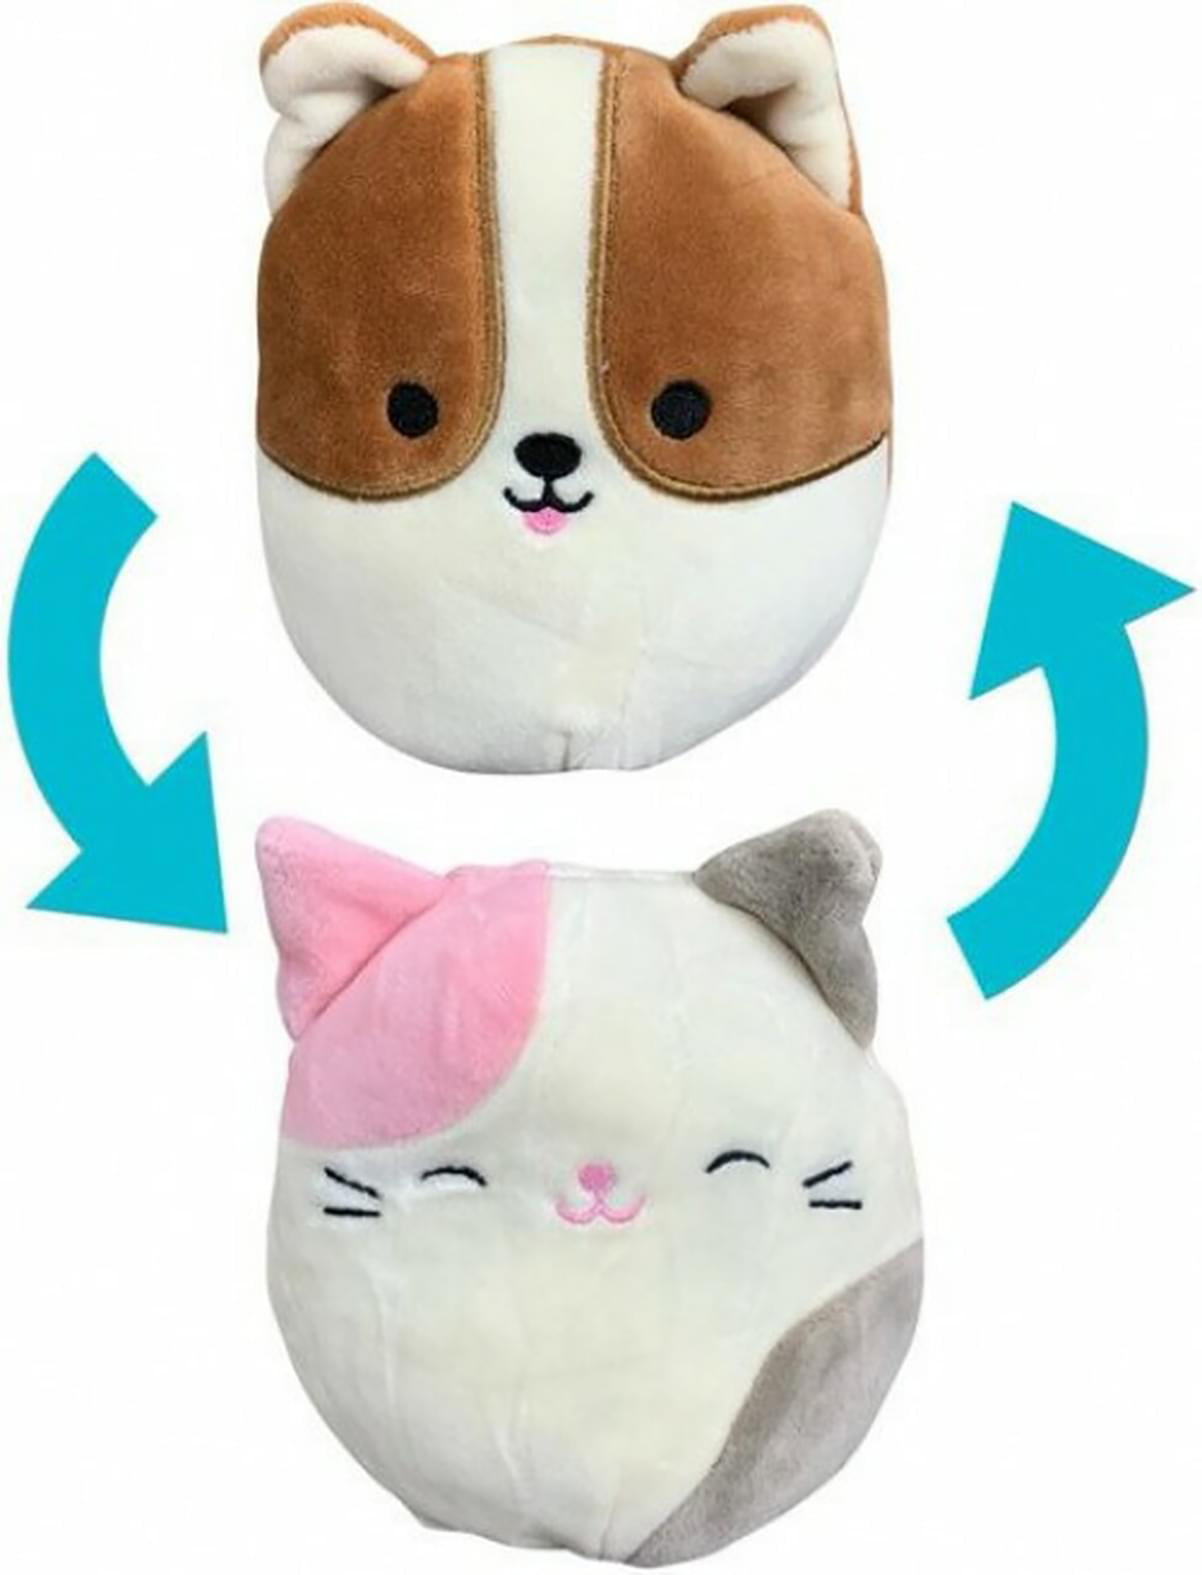 Squishmallow Valentines Calico Cat Kitten Plush off White Pink 2020 Item #q044 for sale online